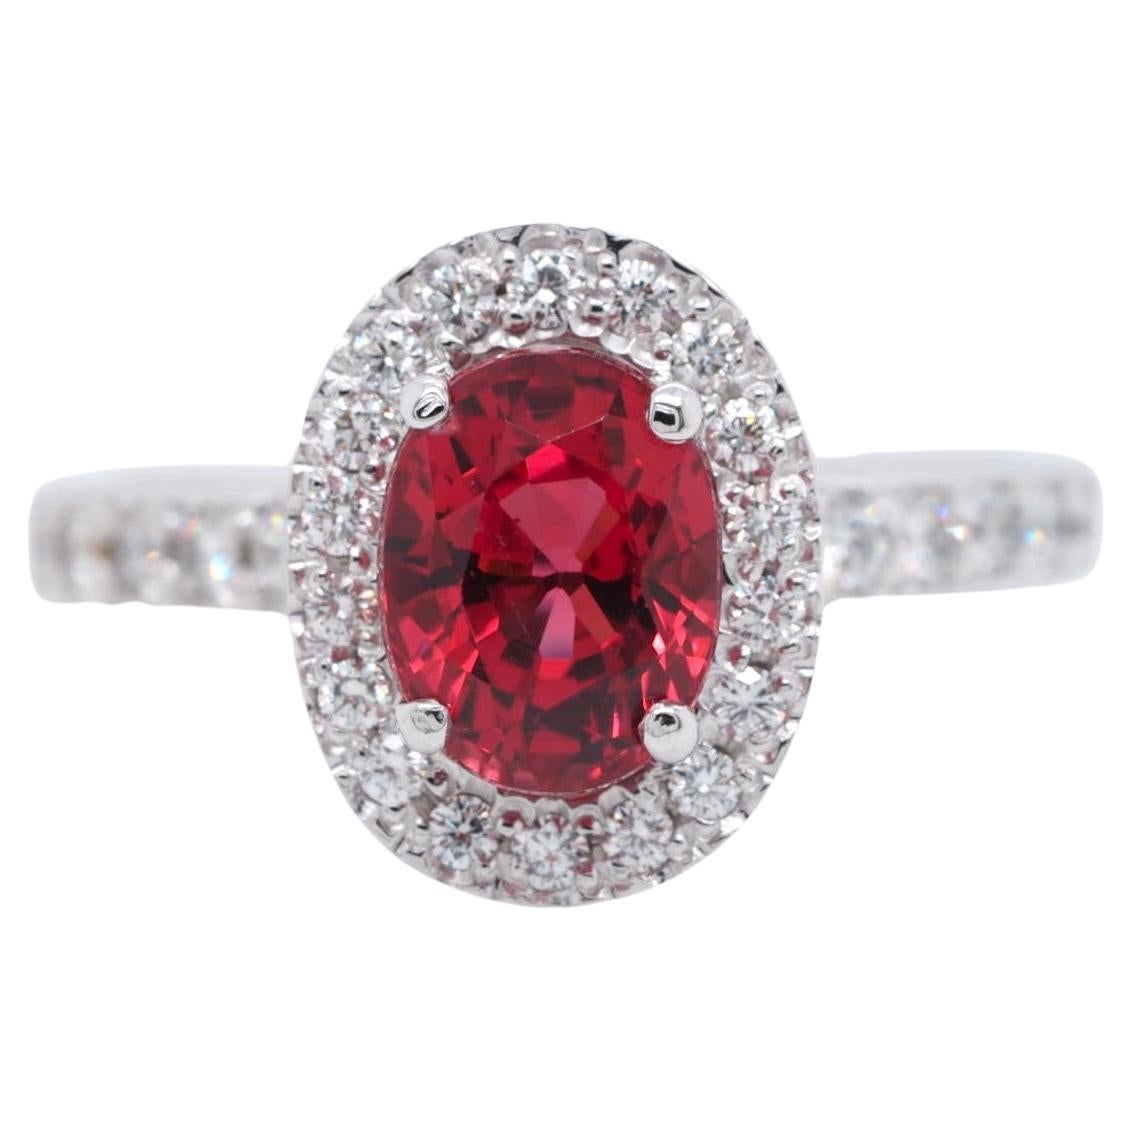 GIA 1.93 ct Oval Cut Natural Spinel & 0.7 ct Diamond 18K White Gold Halo Ring